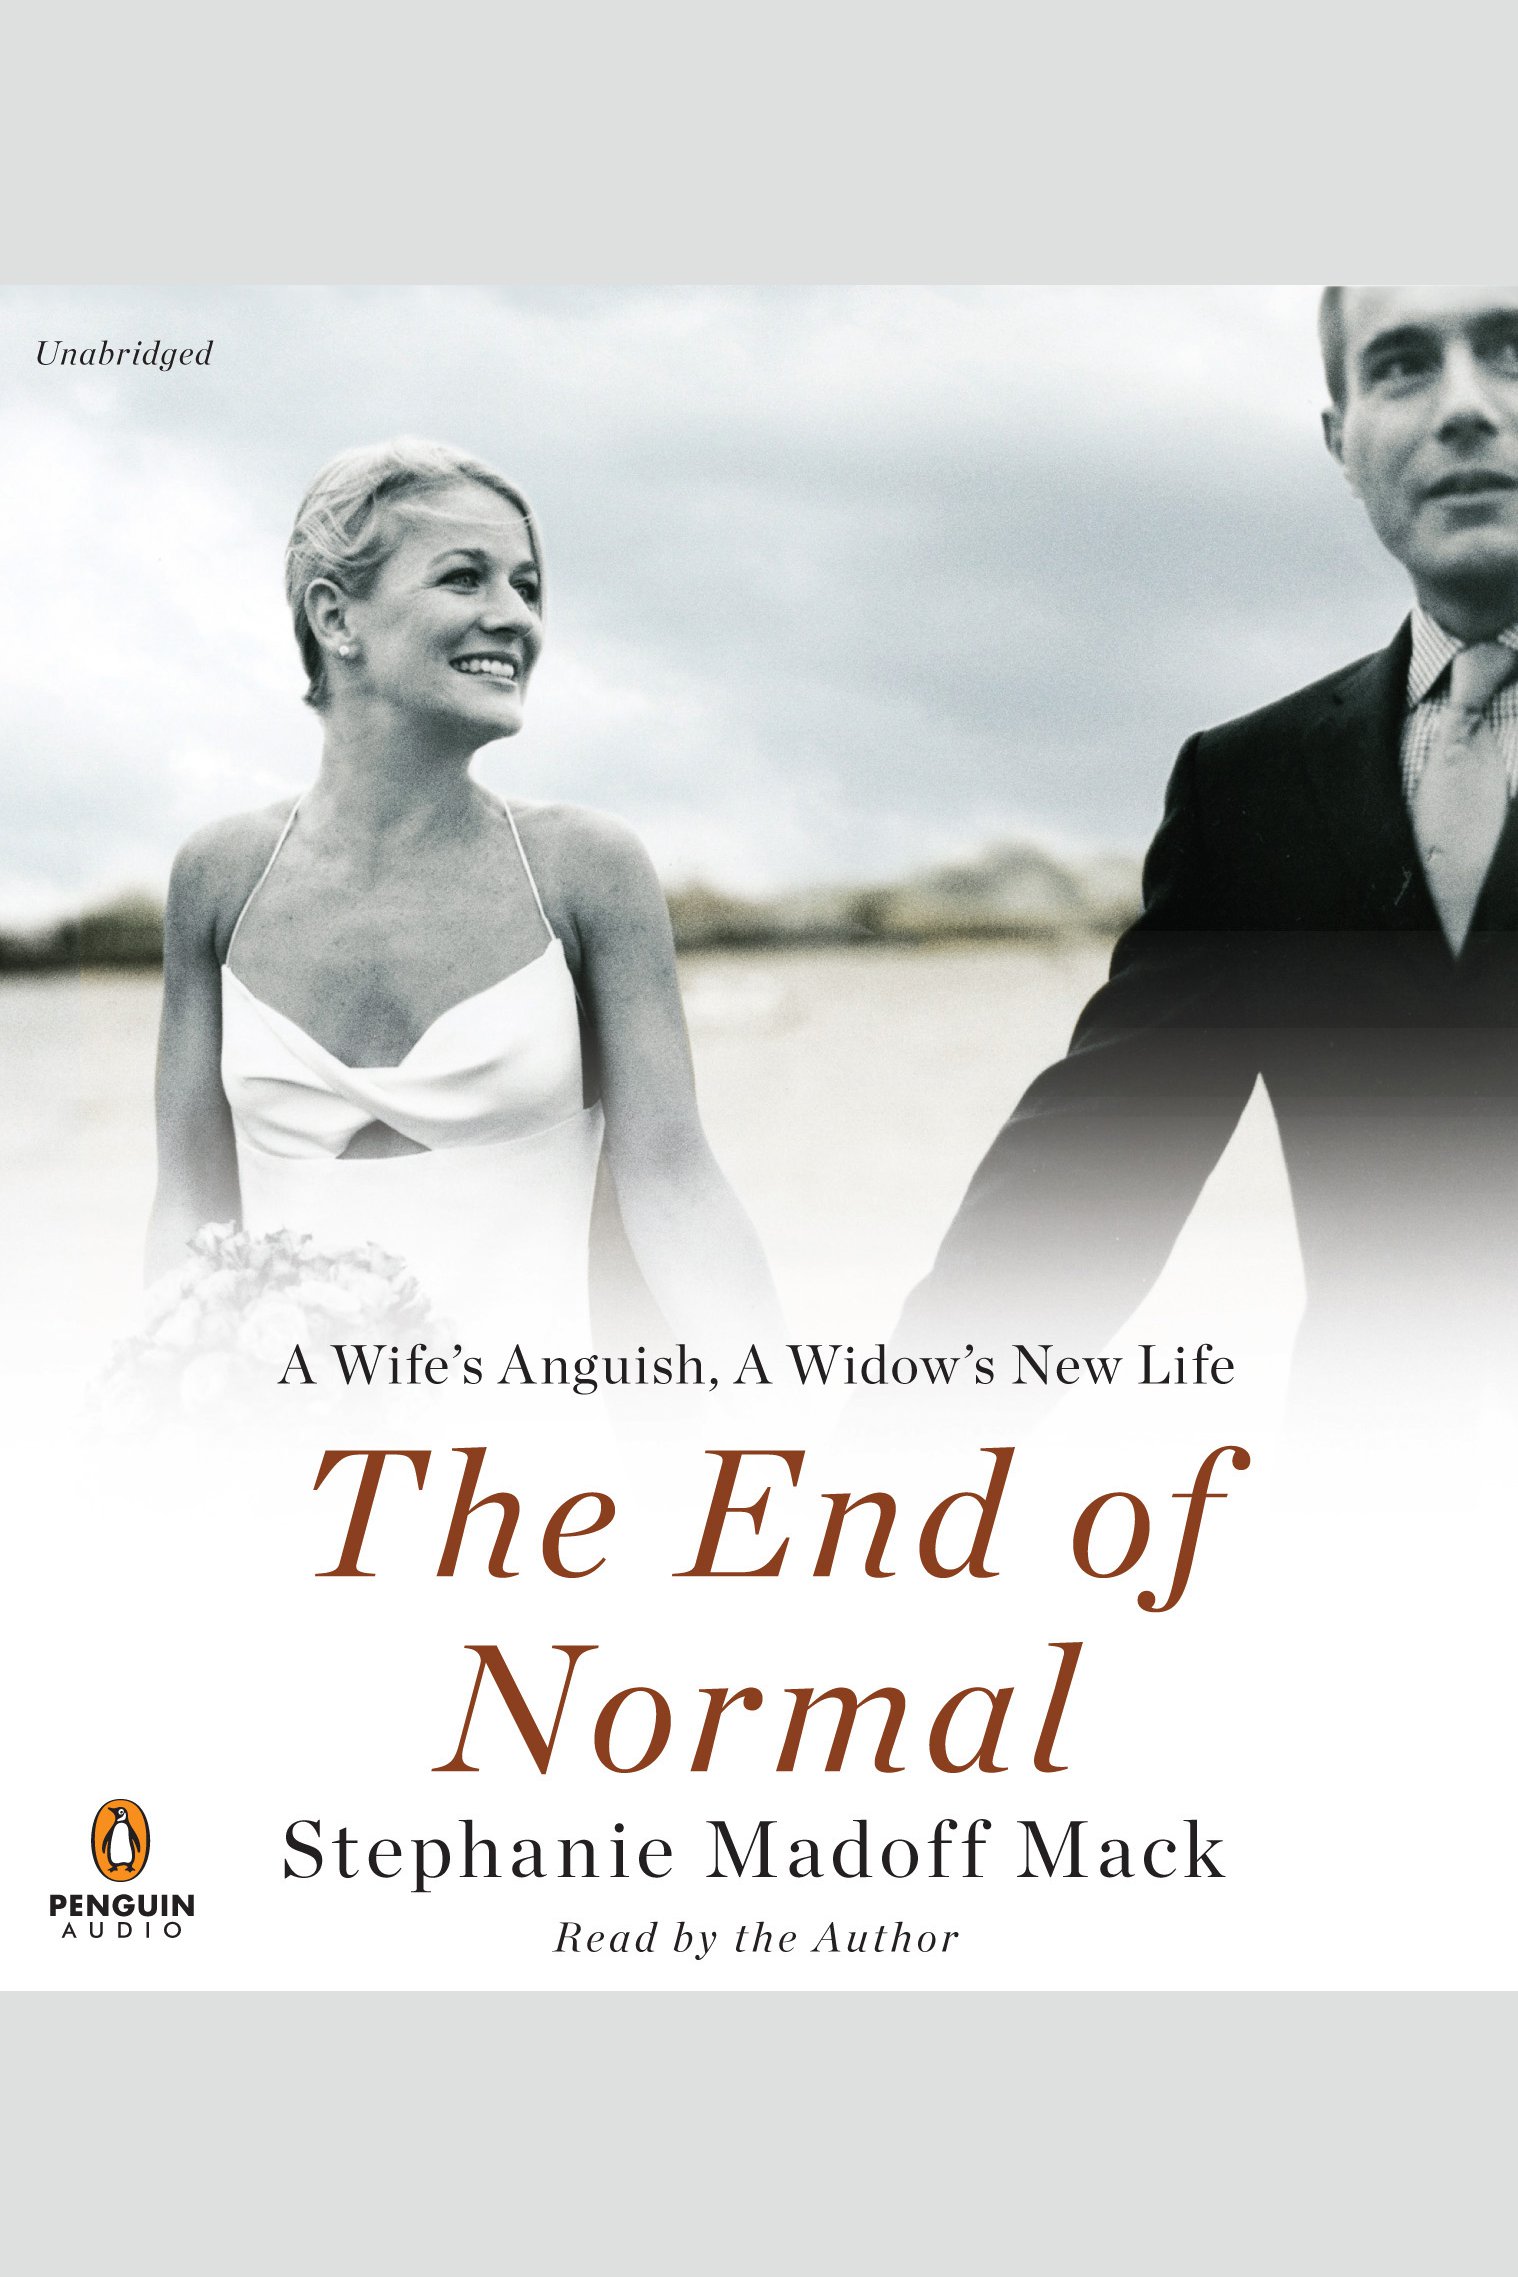 The end of normal a wife's anguish, a widow's new life cover image